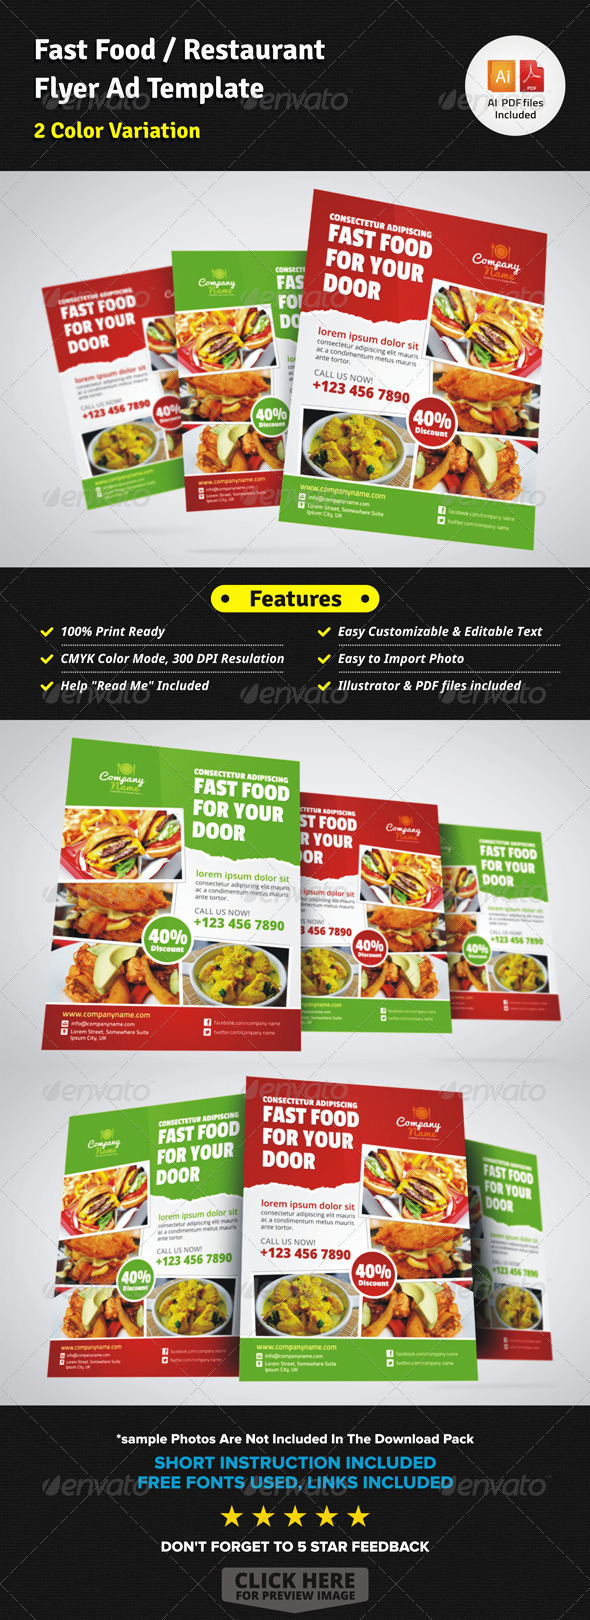 Fast Food / Restaurant Flyer Ad Template